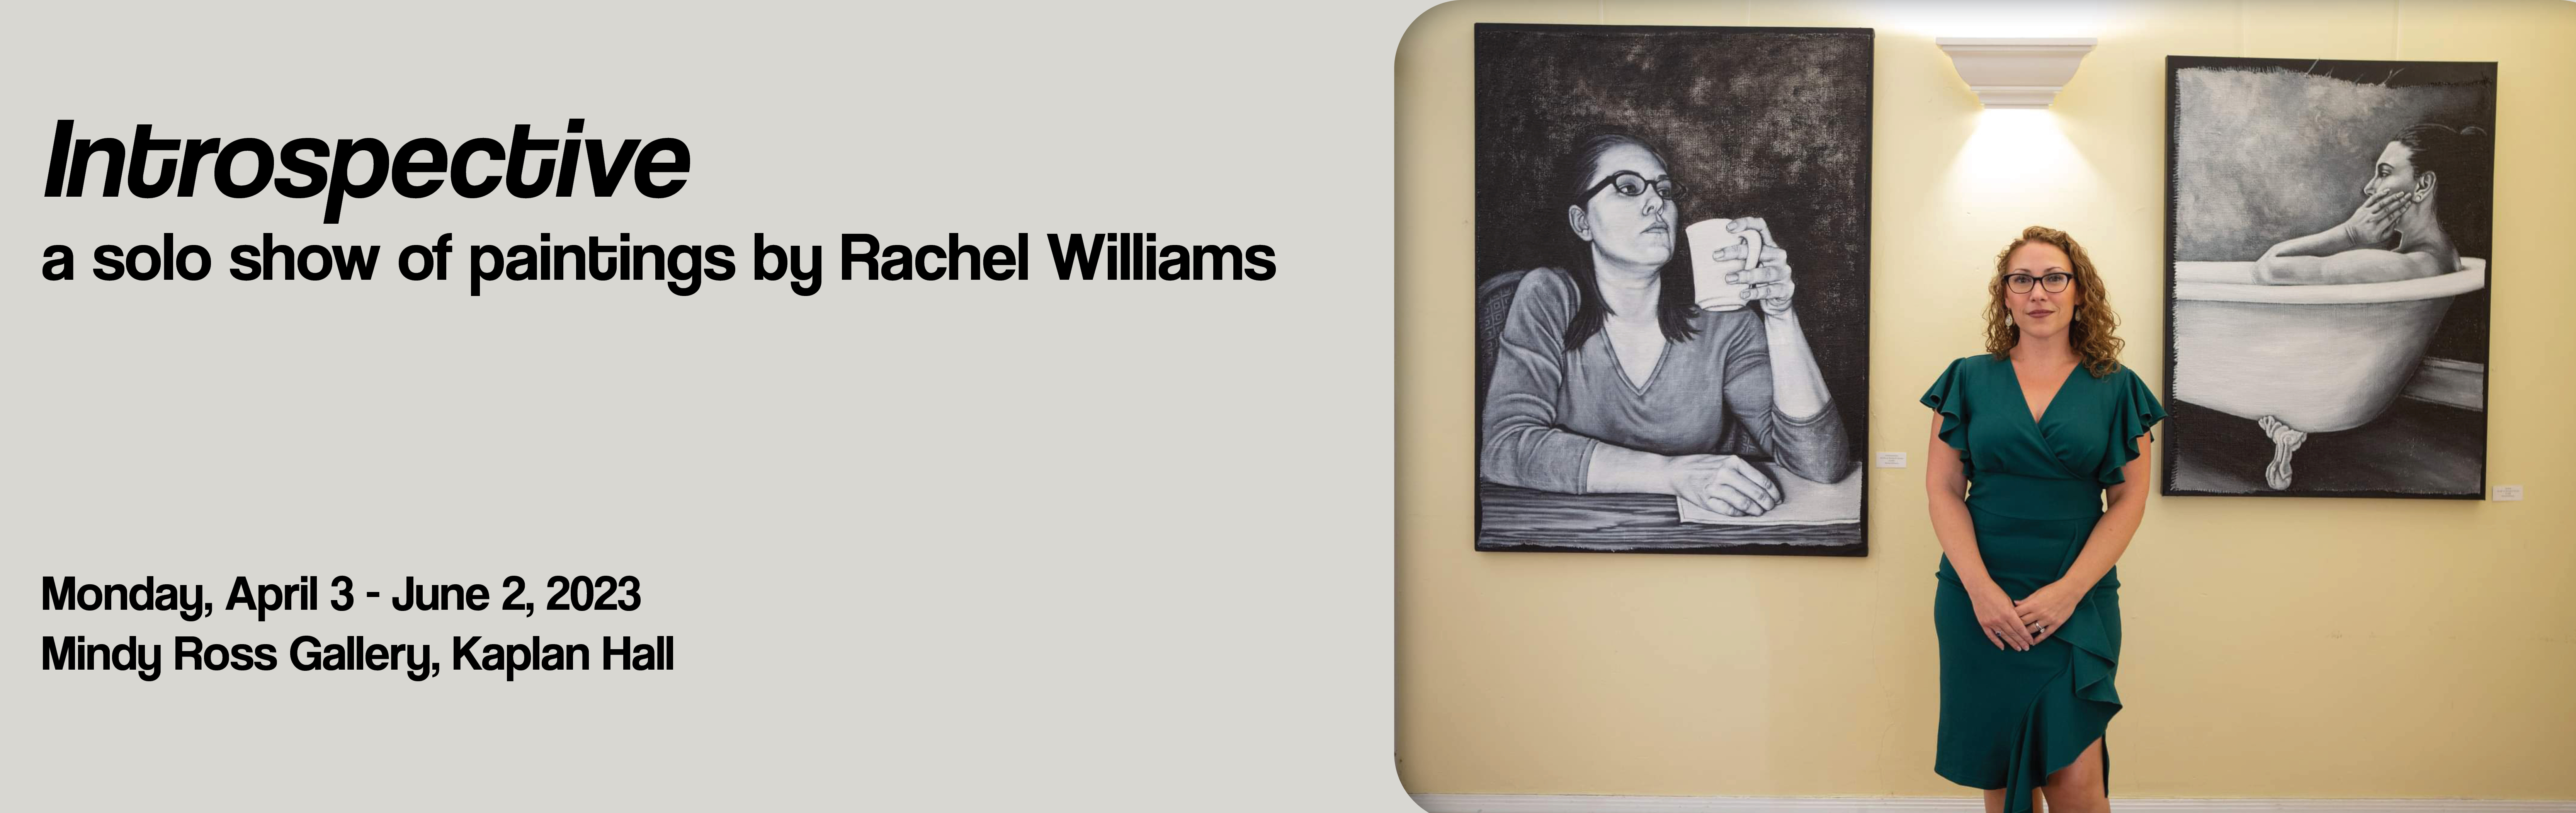 Introspective - a solo show of paintings by Rachel Williams